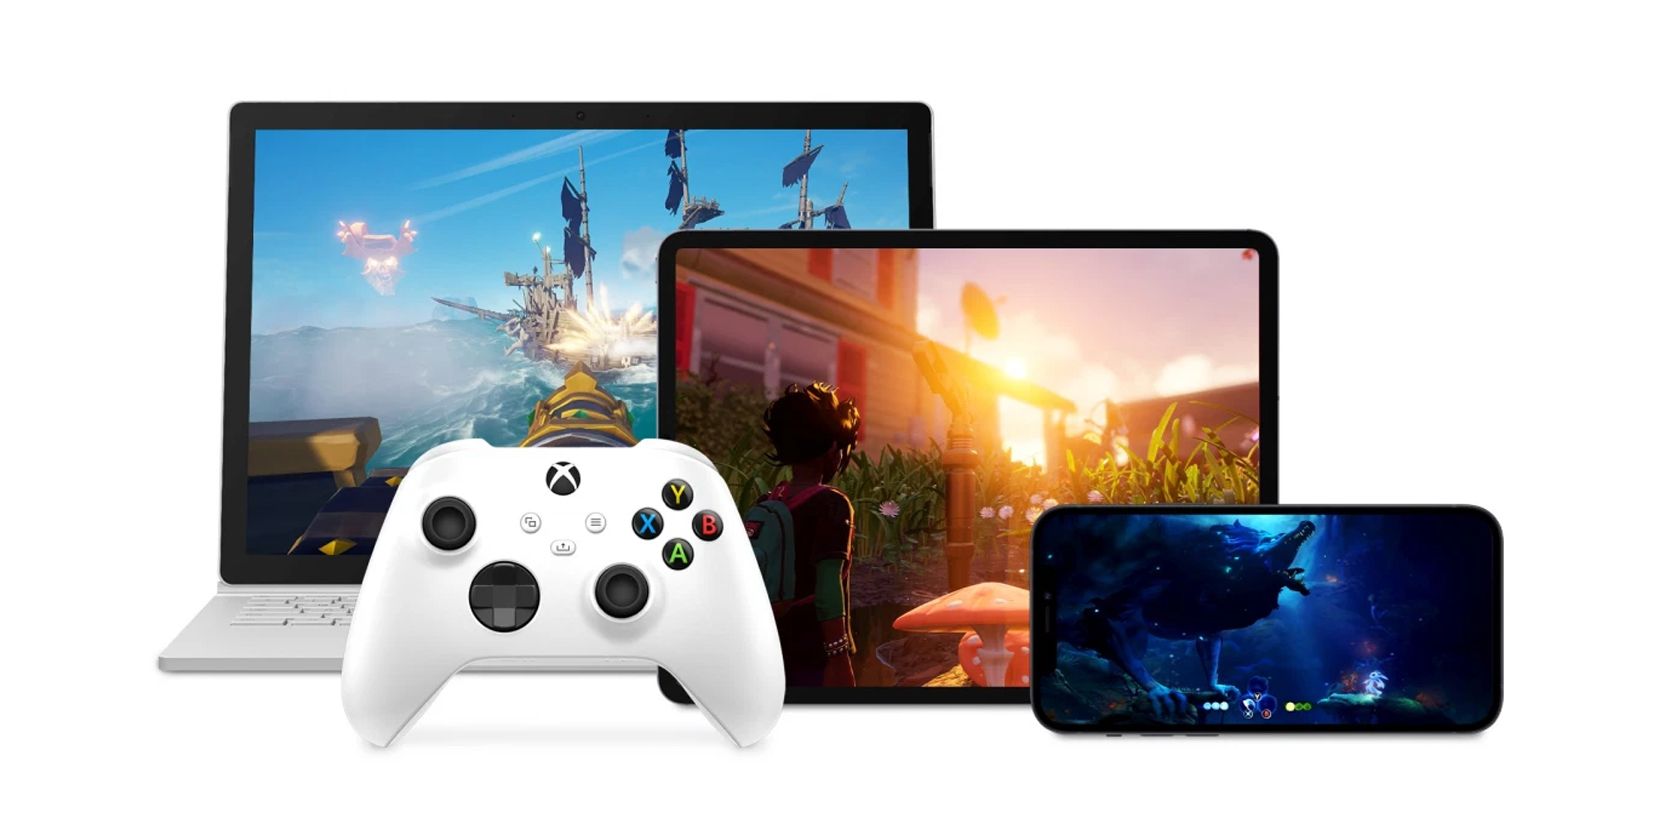 XBox cloud gaming shown on various devices